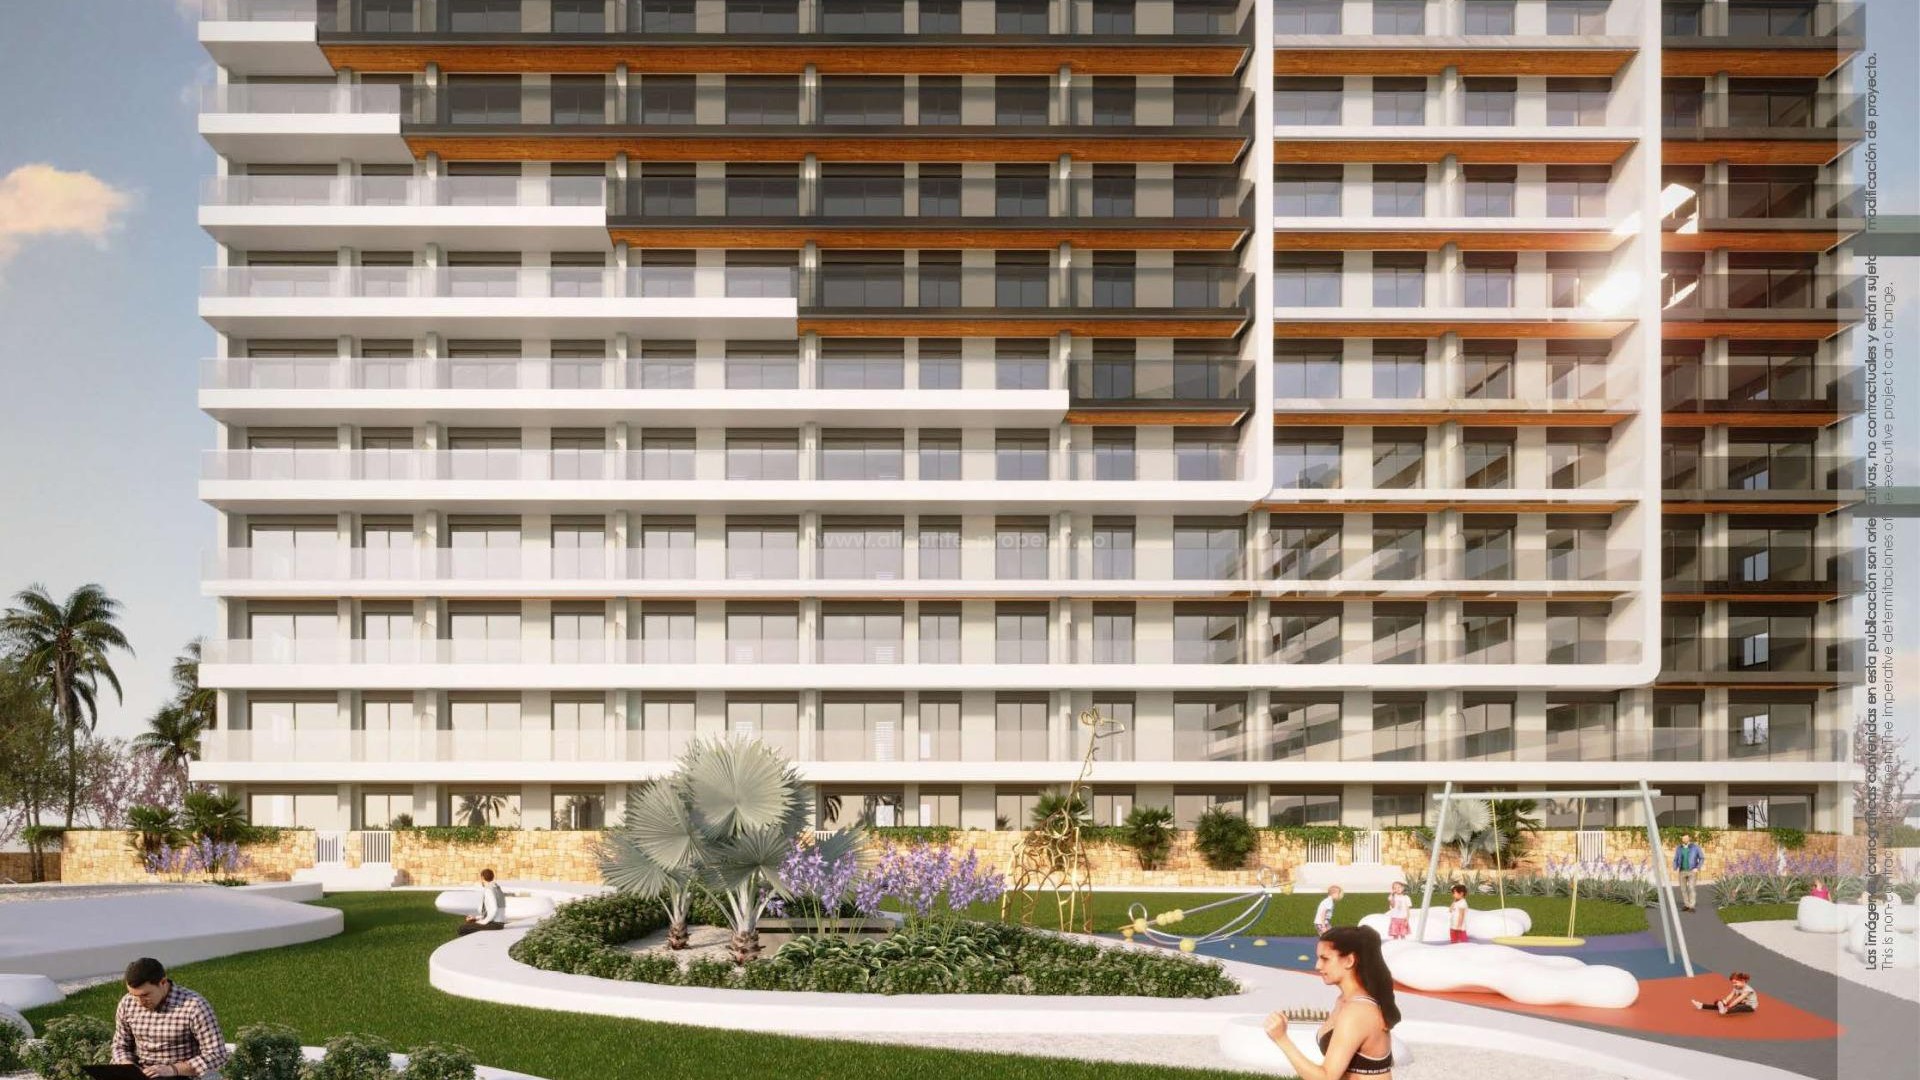 220 apartments with 2/3 bedrooms and 2 bathrooms in Punta Prima, large terraces, ground floor with garden and penthouses with solarium, communal swimming pool